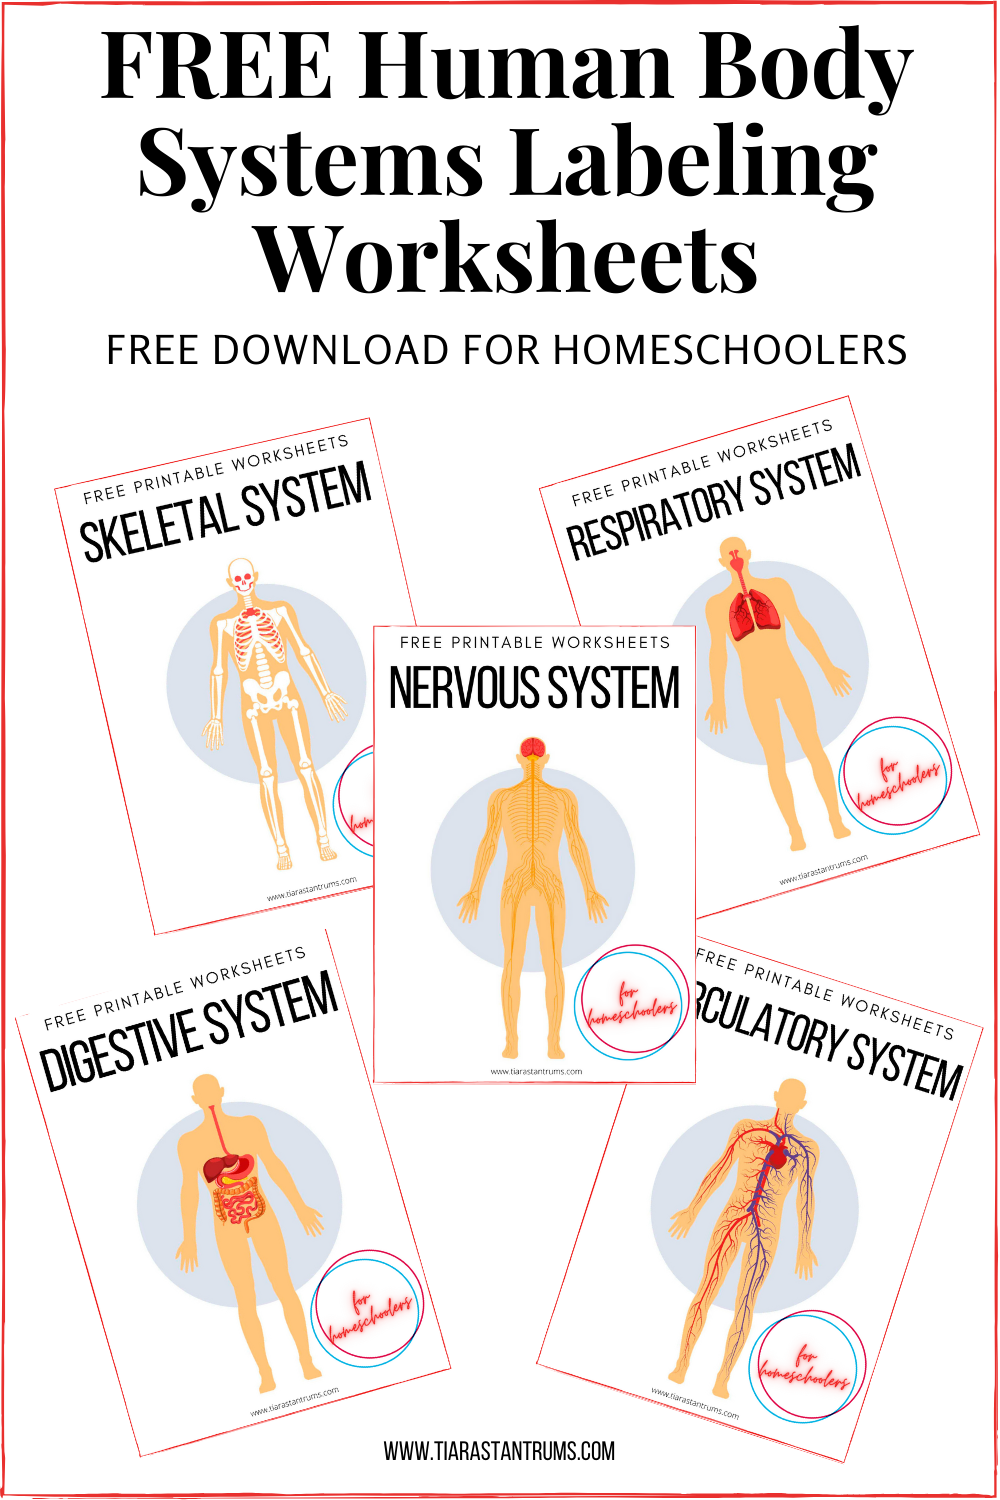 free-human-body-systems-labeling-worksheets-tiaras-tantrums-free-muscular-system-labeling